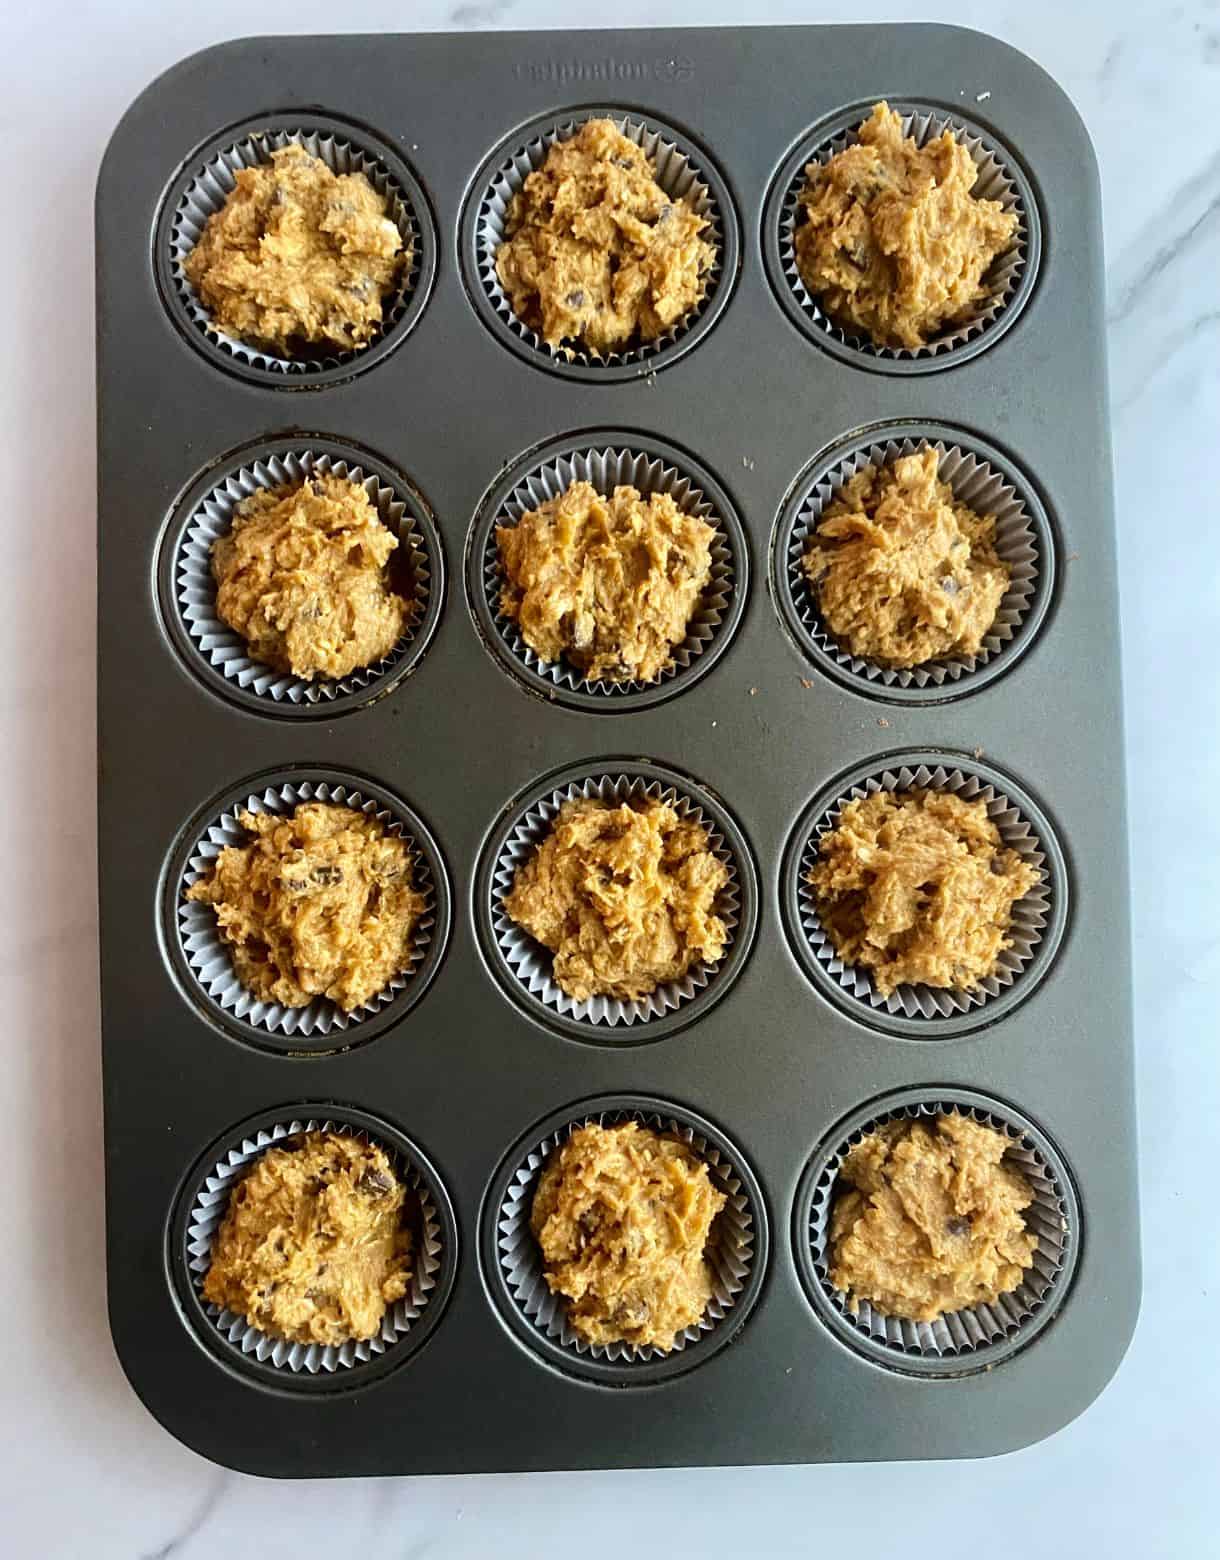 A pan of unbaked muffins ready to go in the oven.